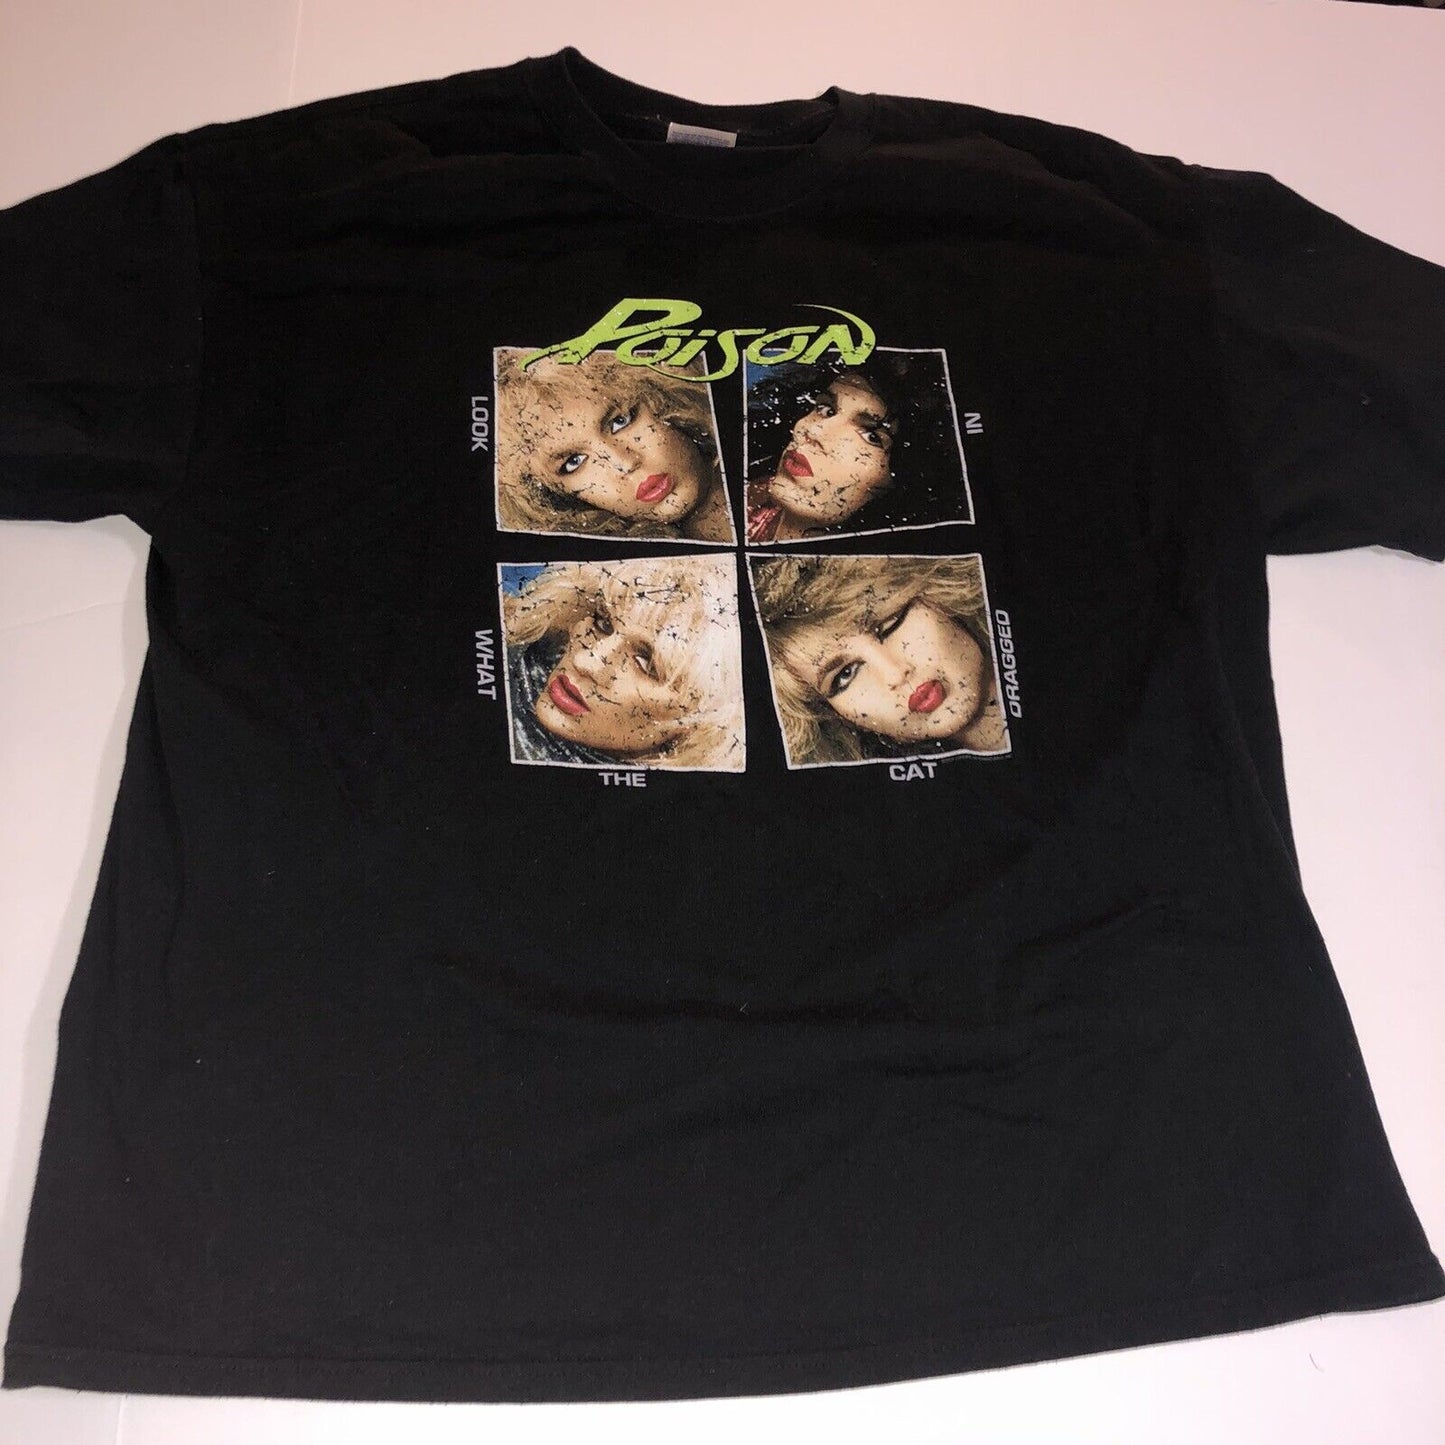 POISON "Look What The Cat Dragged In" (XL) T-Shirt BRETT MICHAELS C.C. DeVILLE